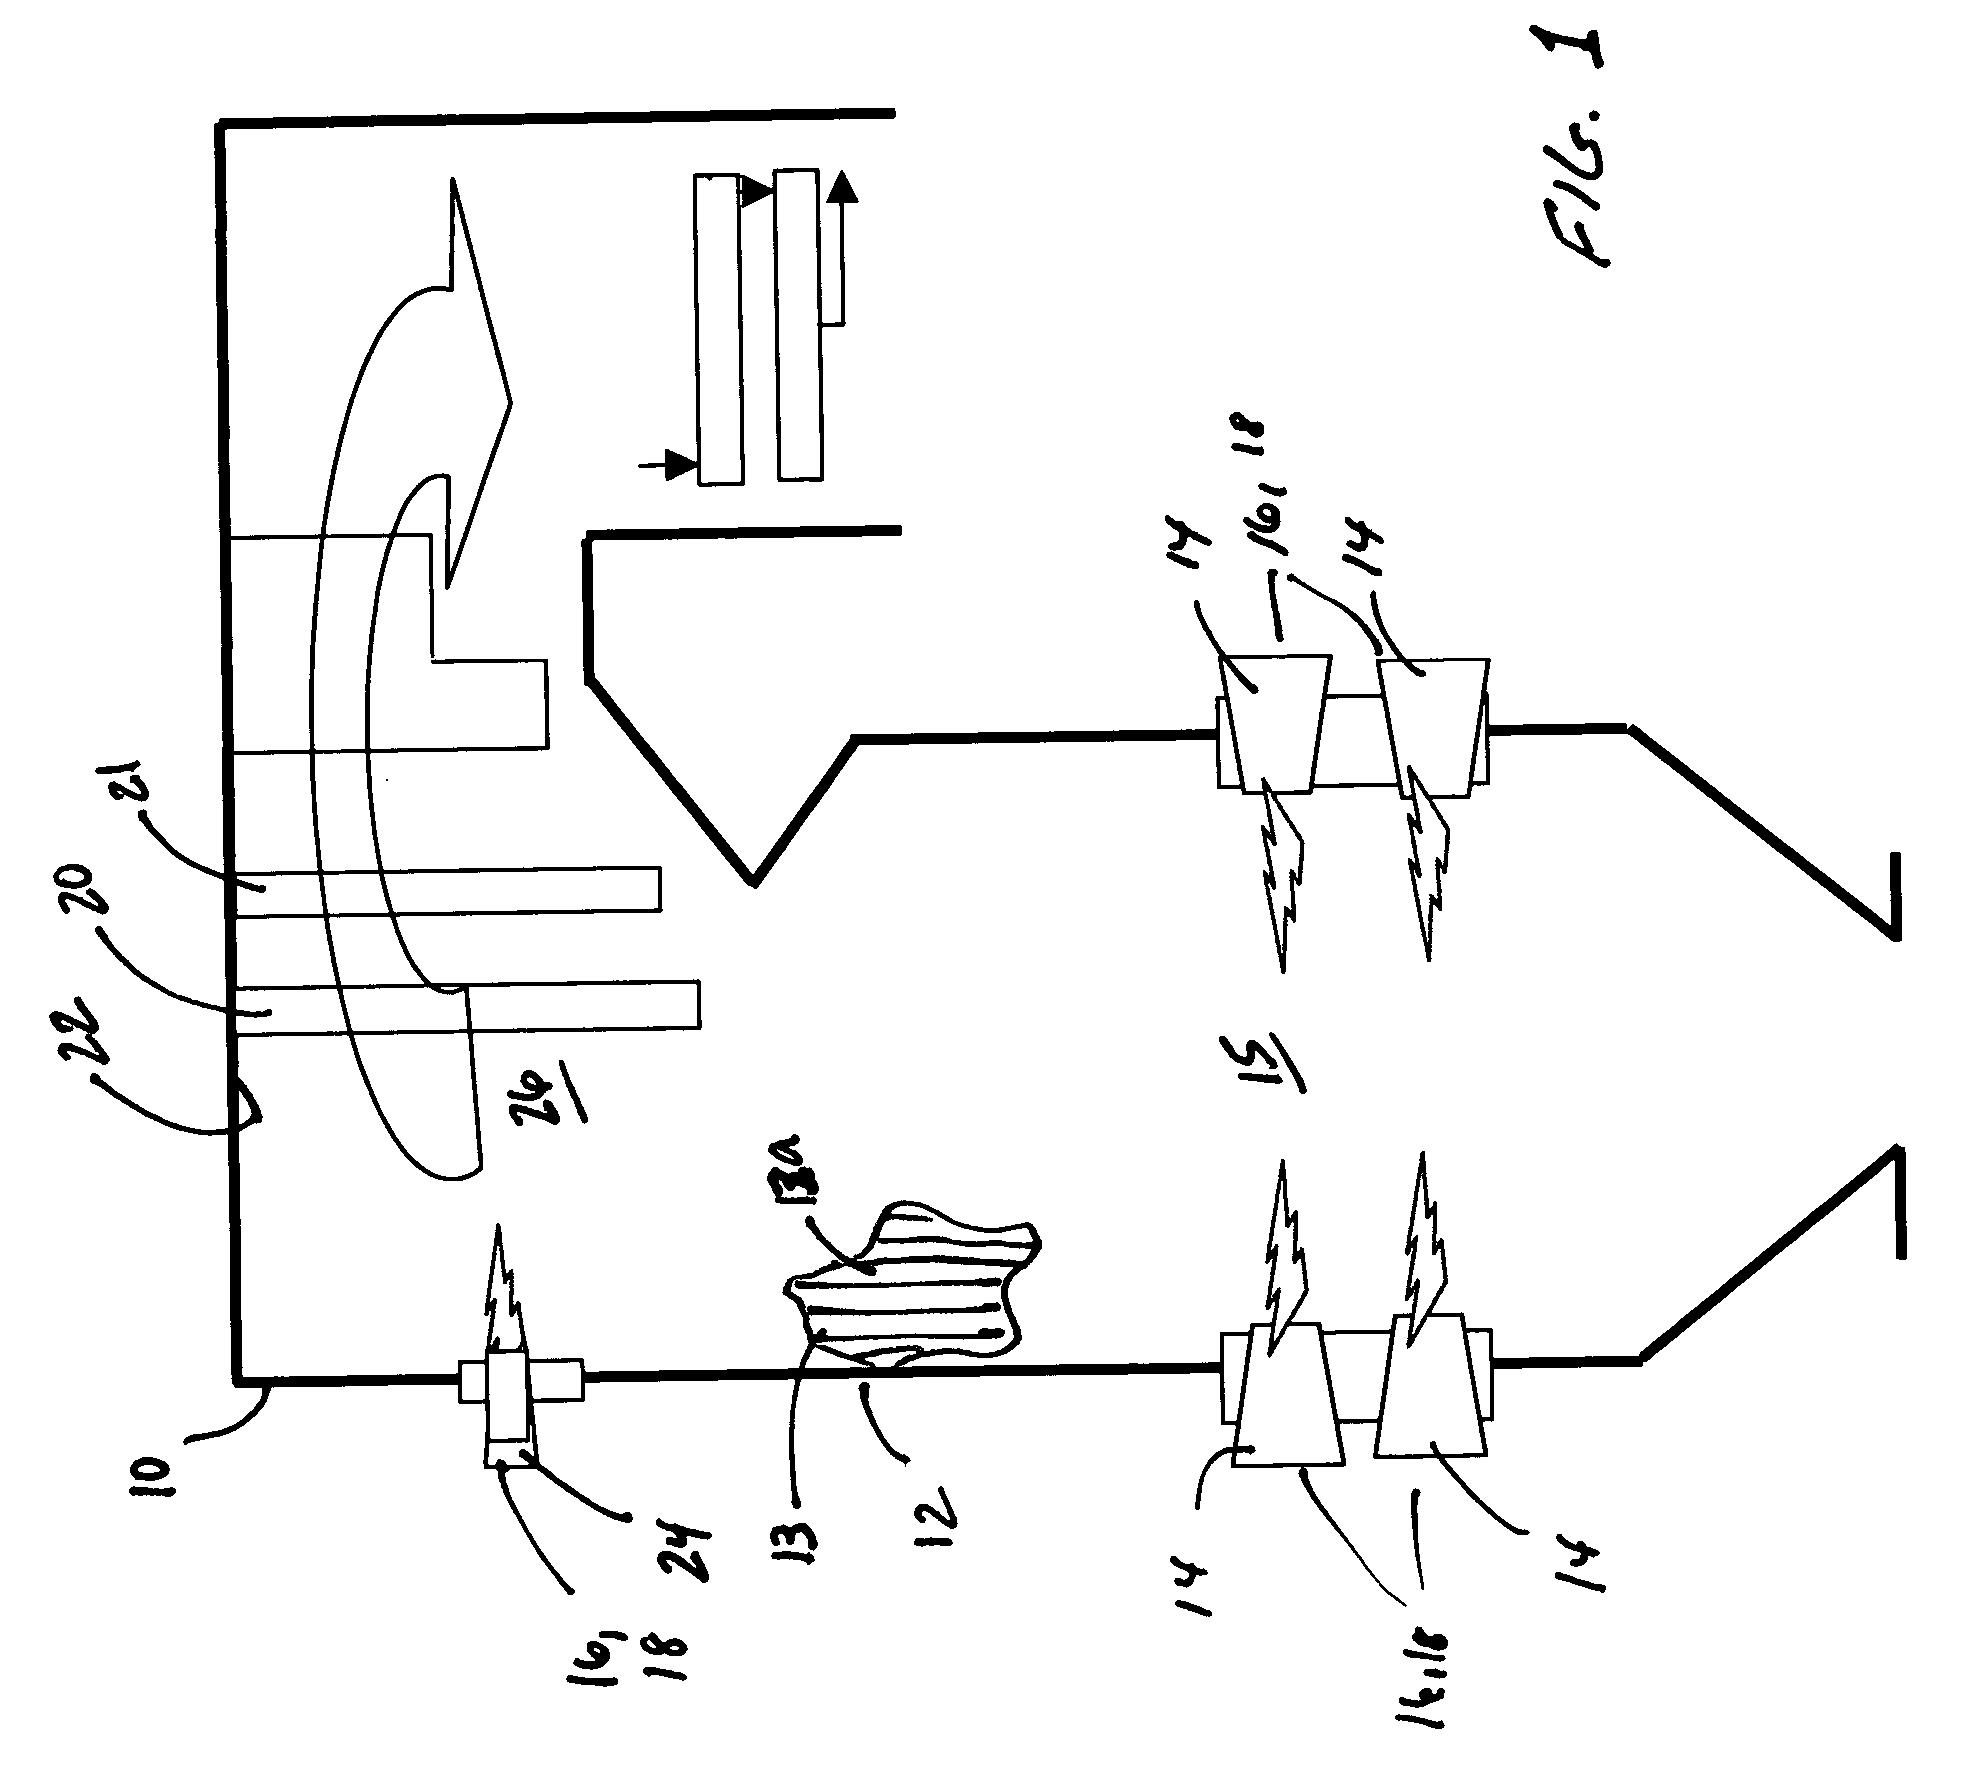 Device and method for boiler superheat temperature control